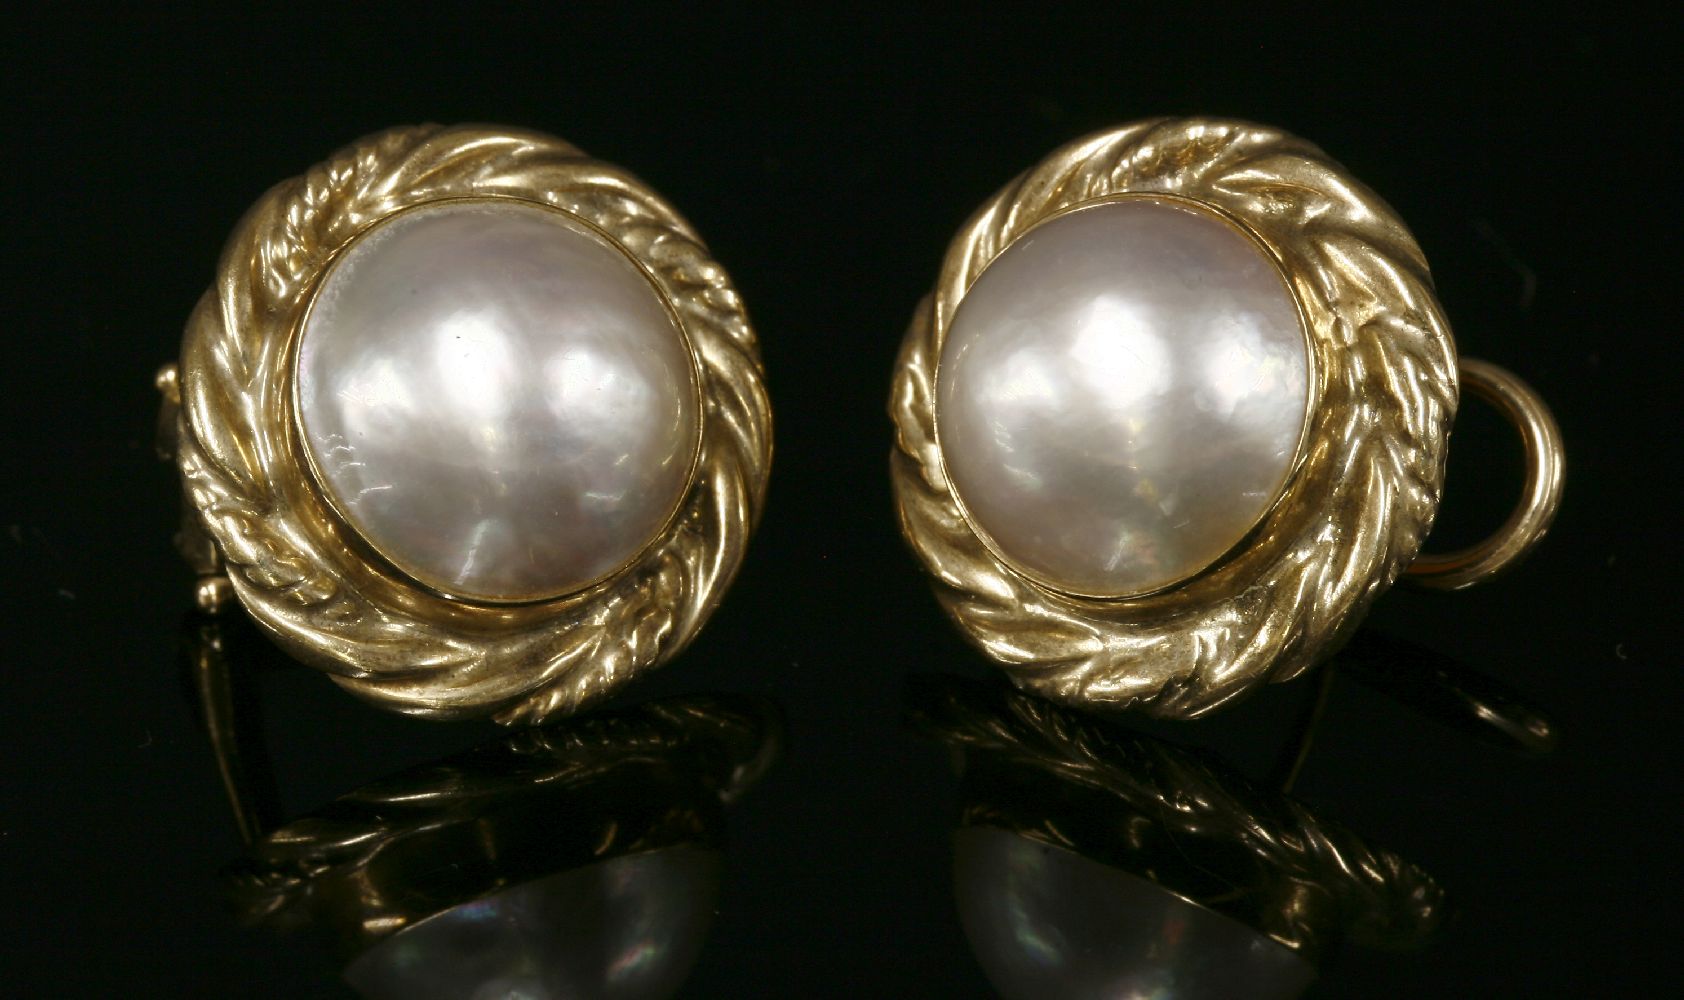 A pair of 9ct gold cultured mabé pearl earrings,with a 12mm mabé pearl, rub set to the centre. A